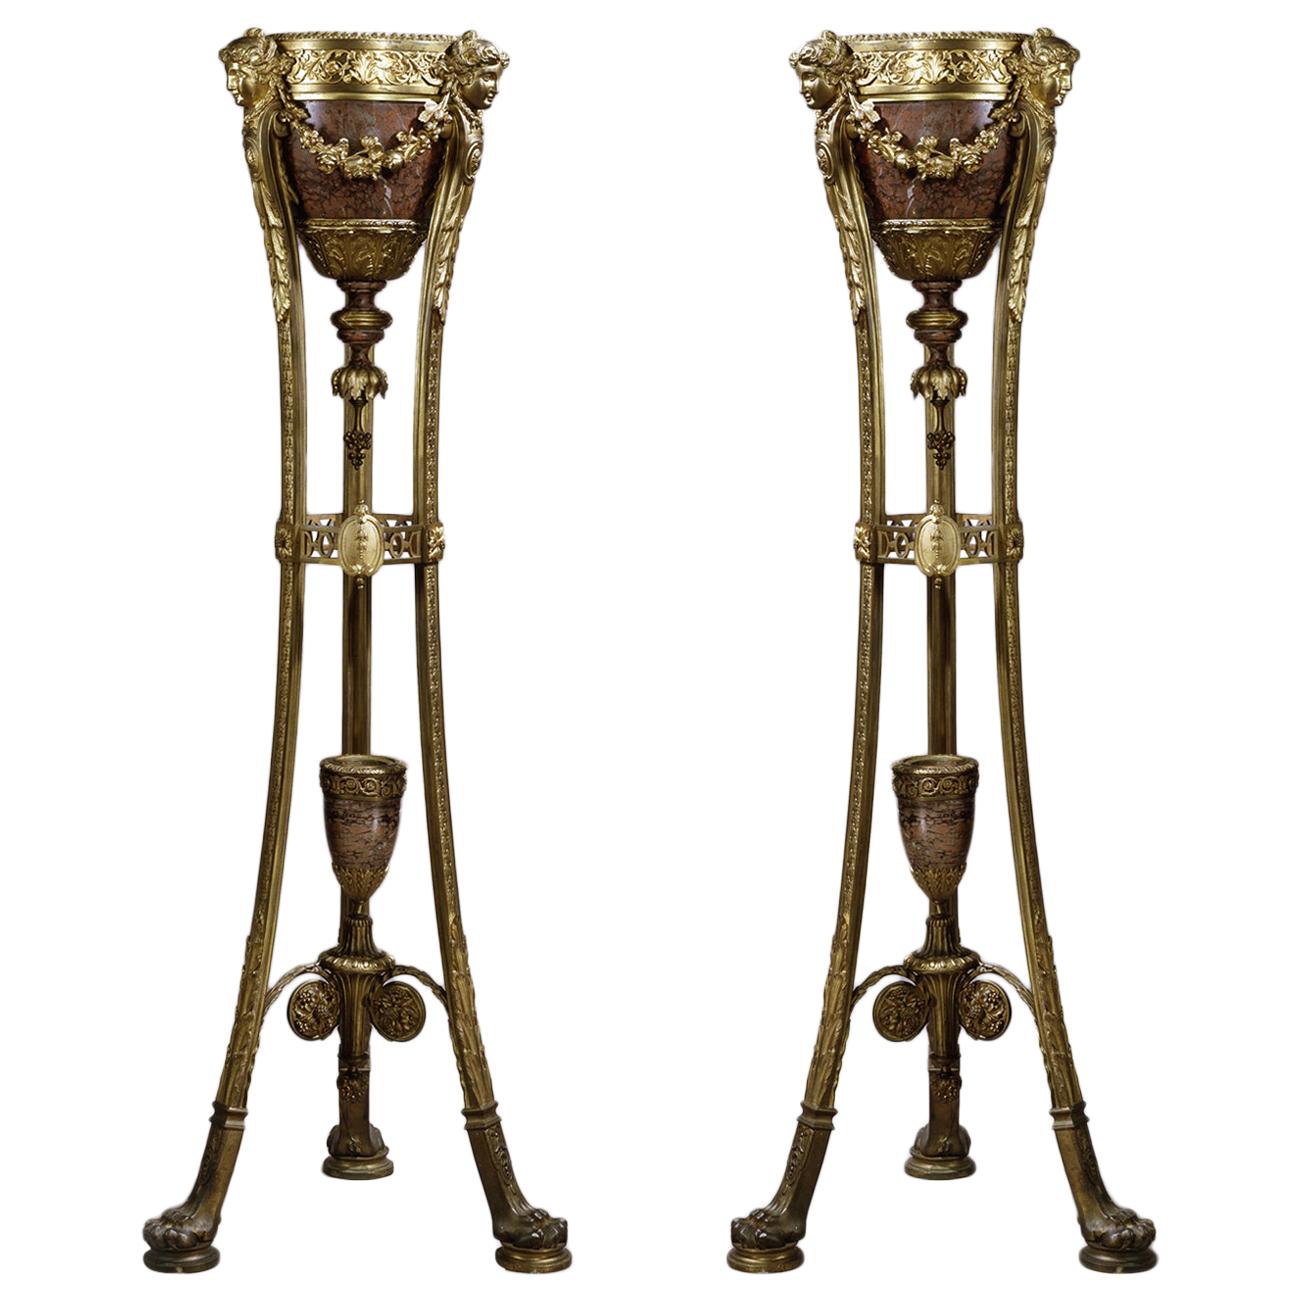 Pair of Regence Style Rouge Griotte Marble Jardinières on Stands, circa 1870